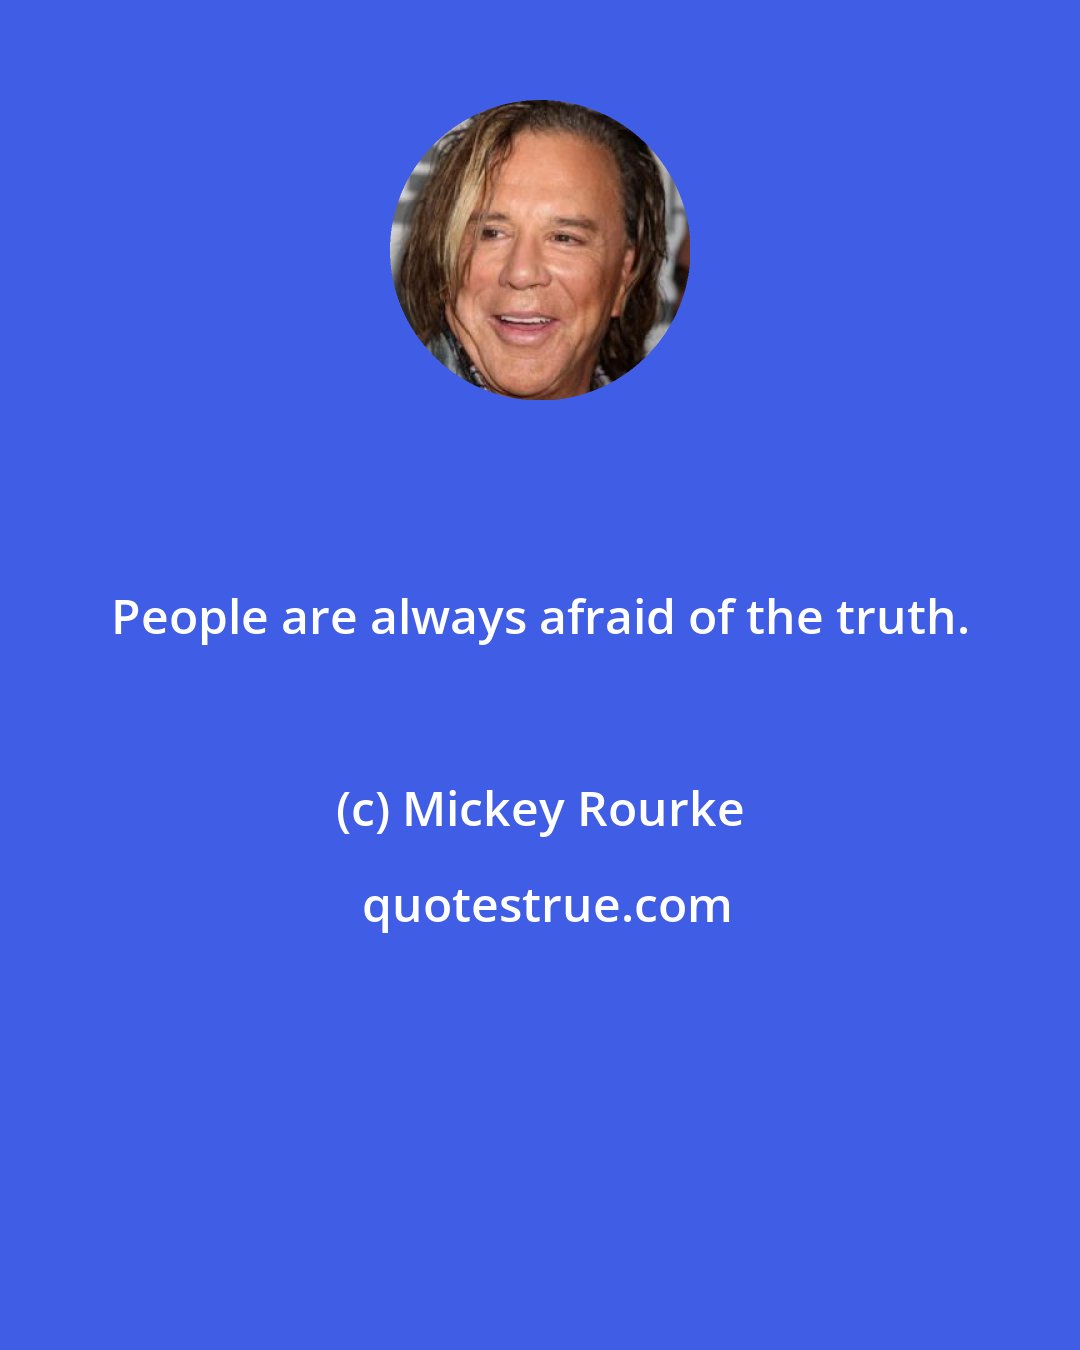 Mickey Rourke: People are always afraid of the truth.